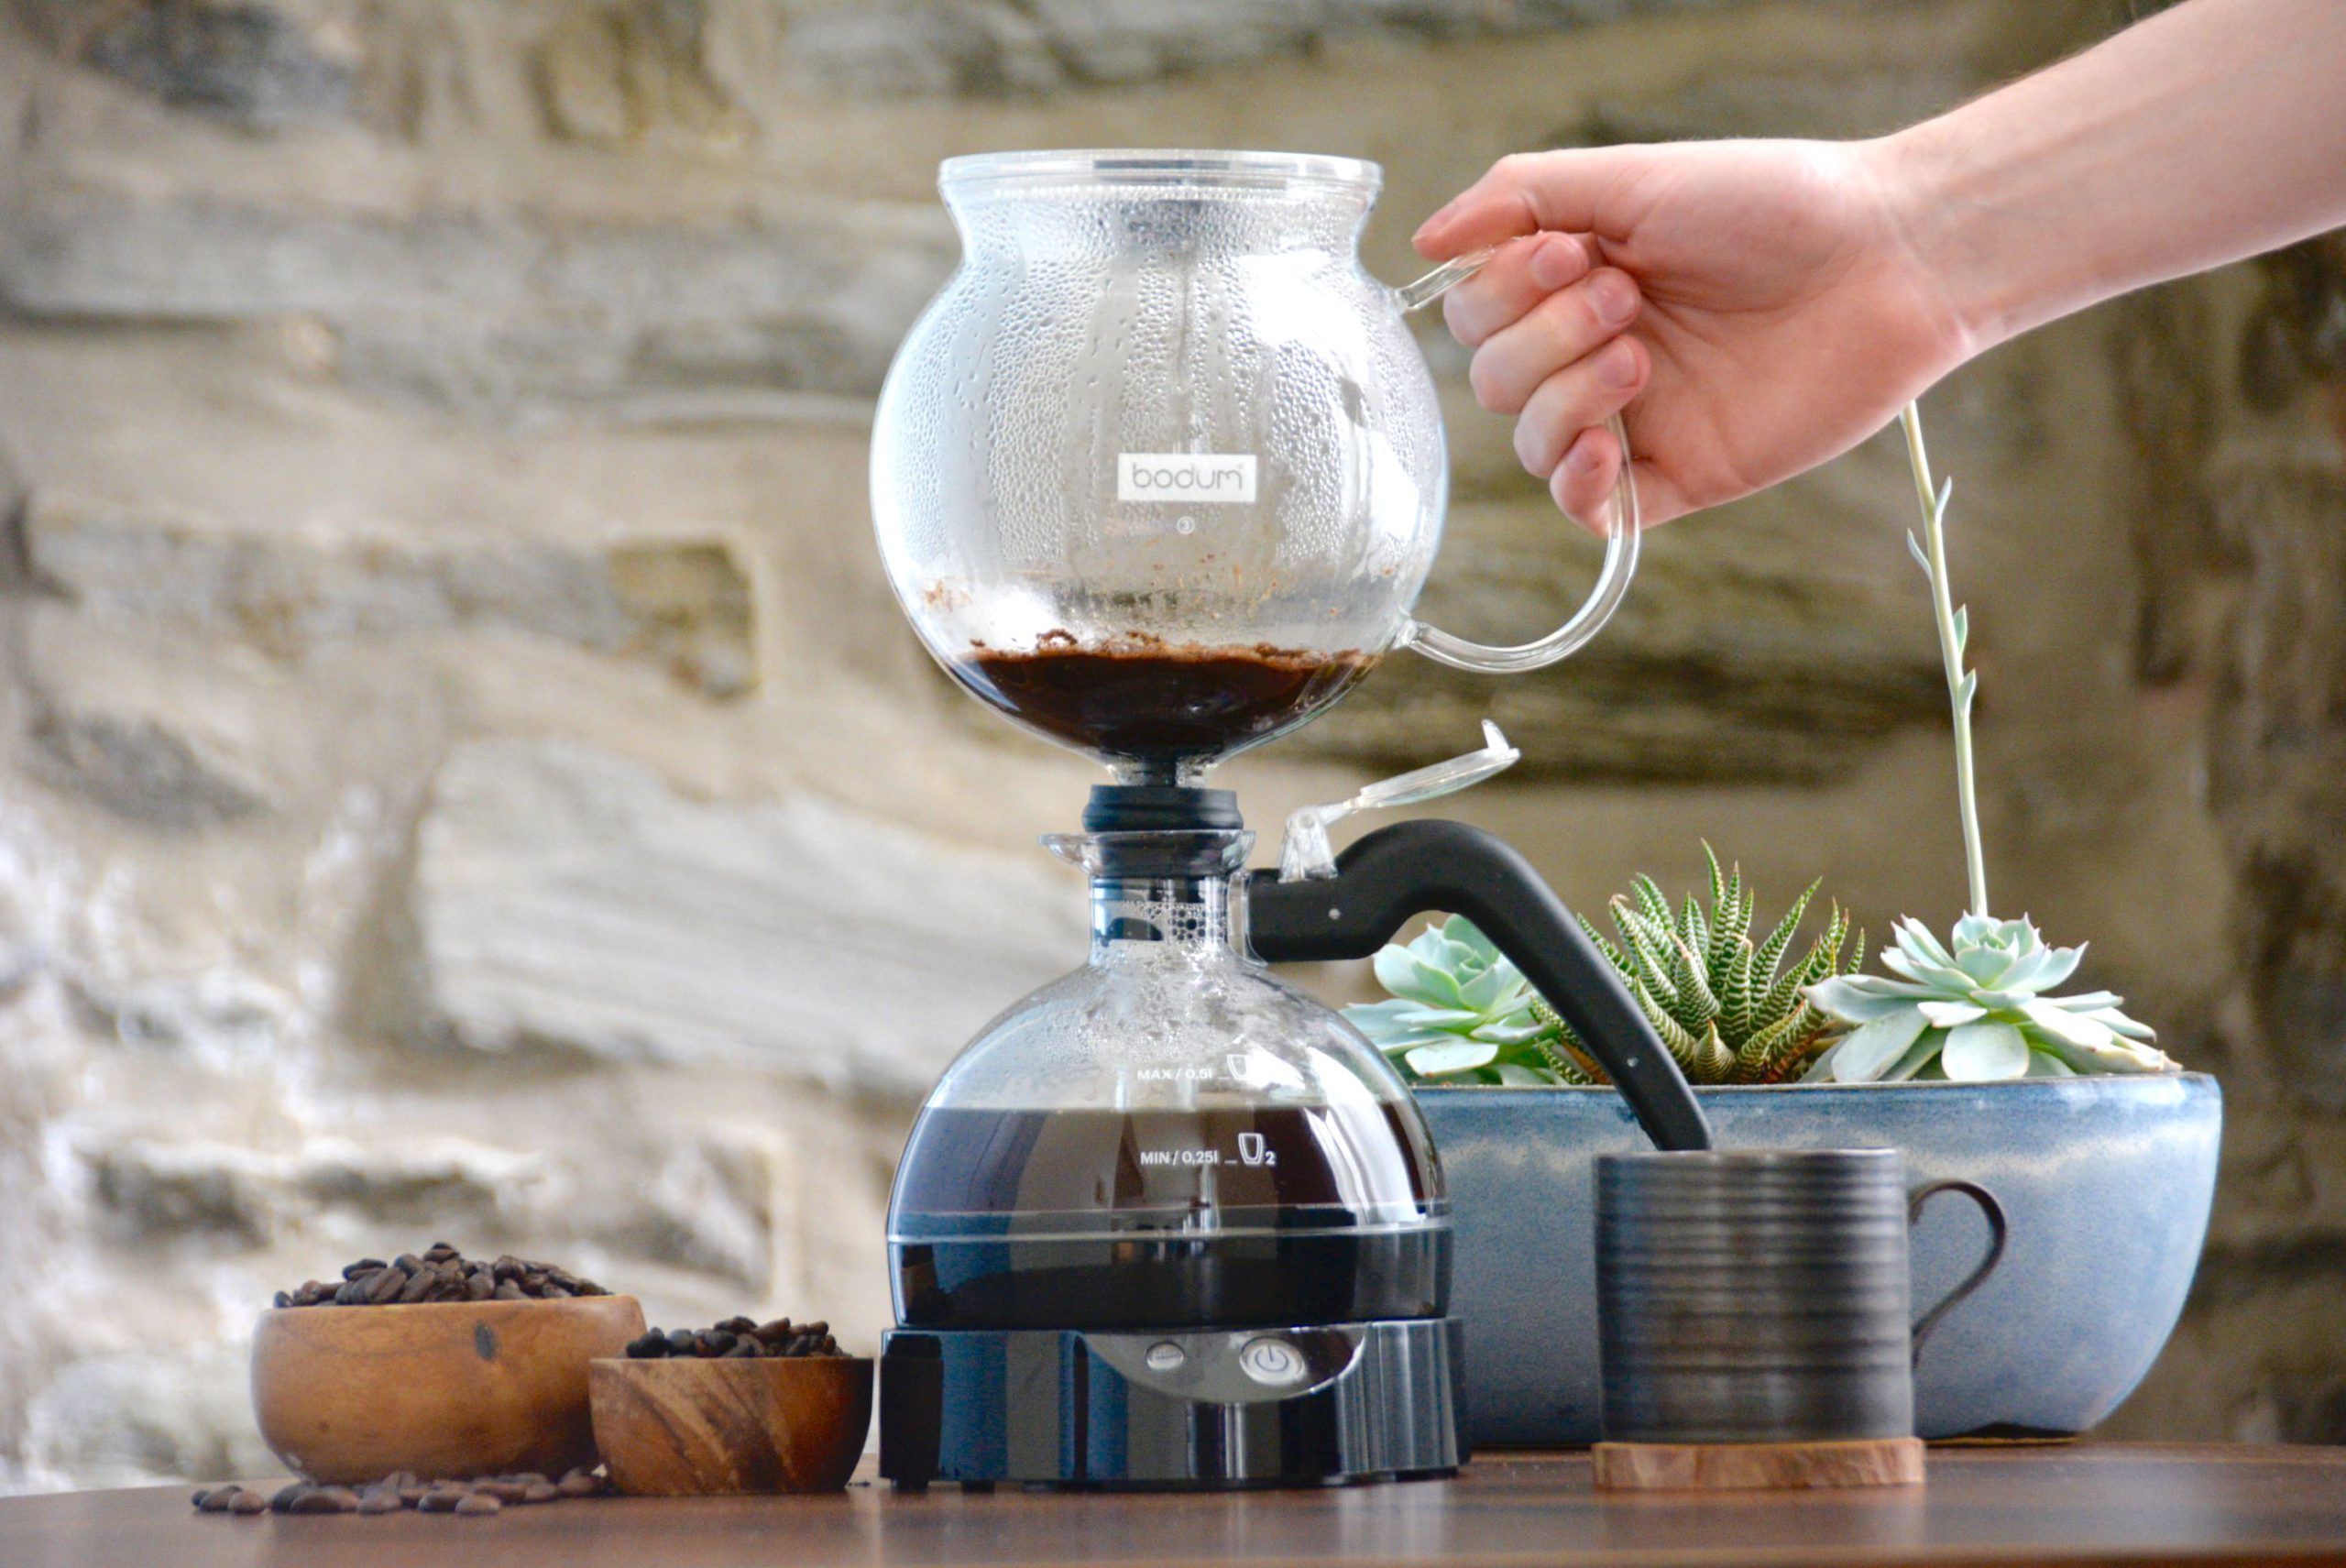 How To Brew Coffee Using A Vacuum Siphon Coffee Maker: Recipe Included - Baked, Brewed, Beautiful